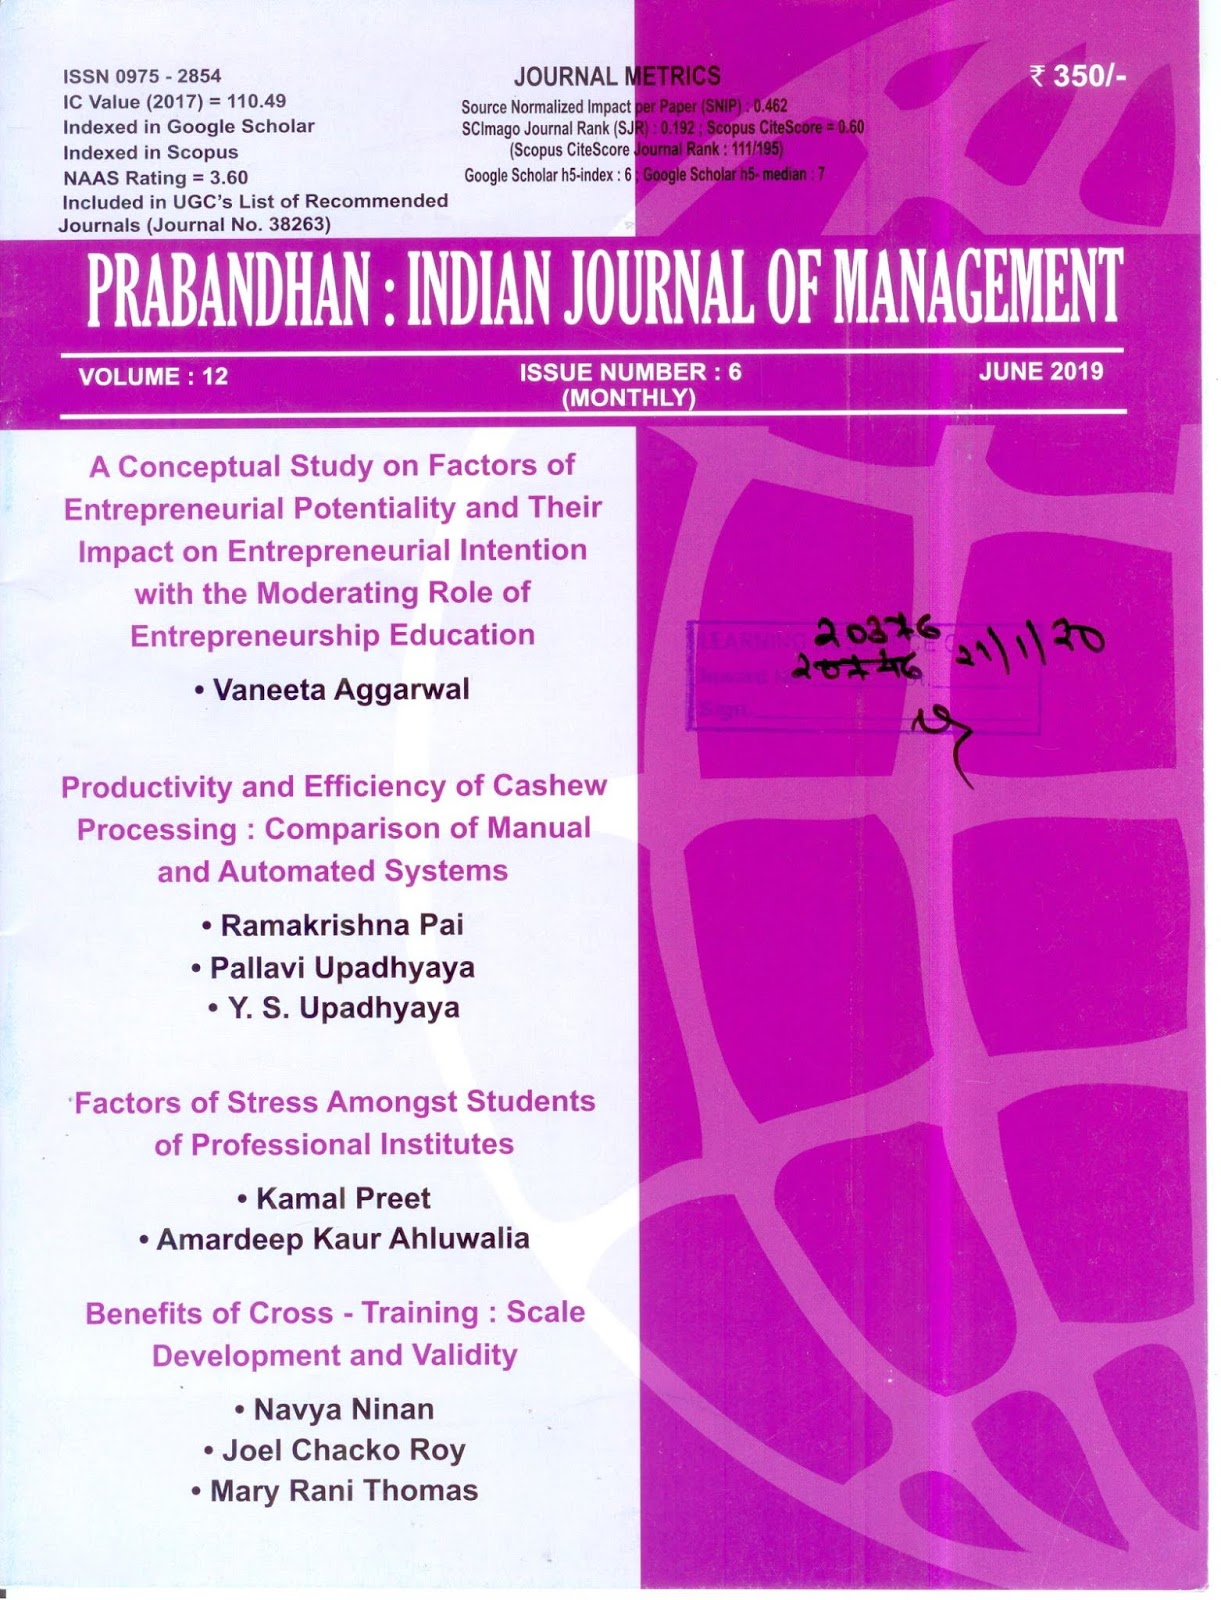 http://www.indianjournalofmanagement.com/index.php/pijom/issue/view/8528